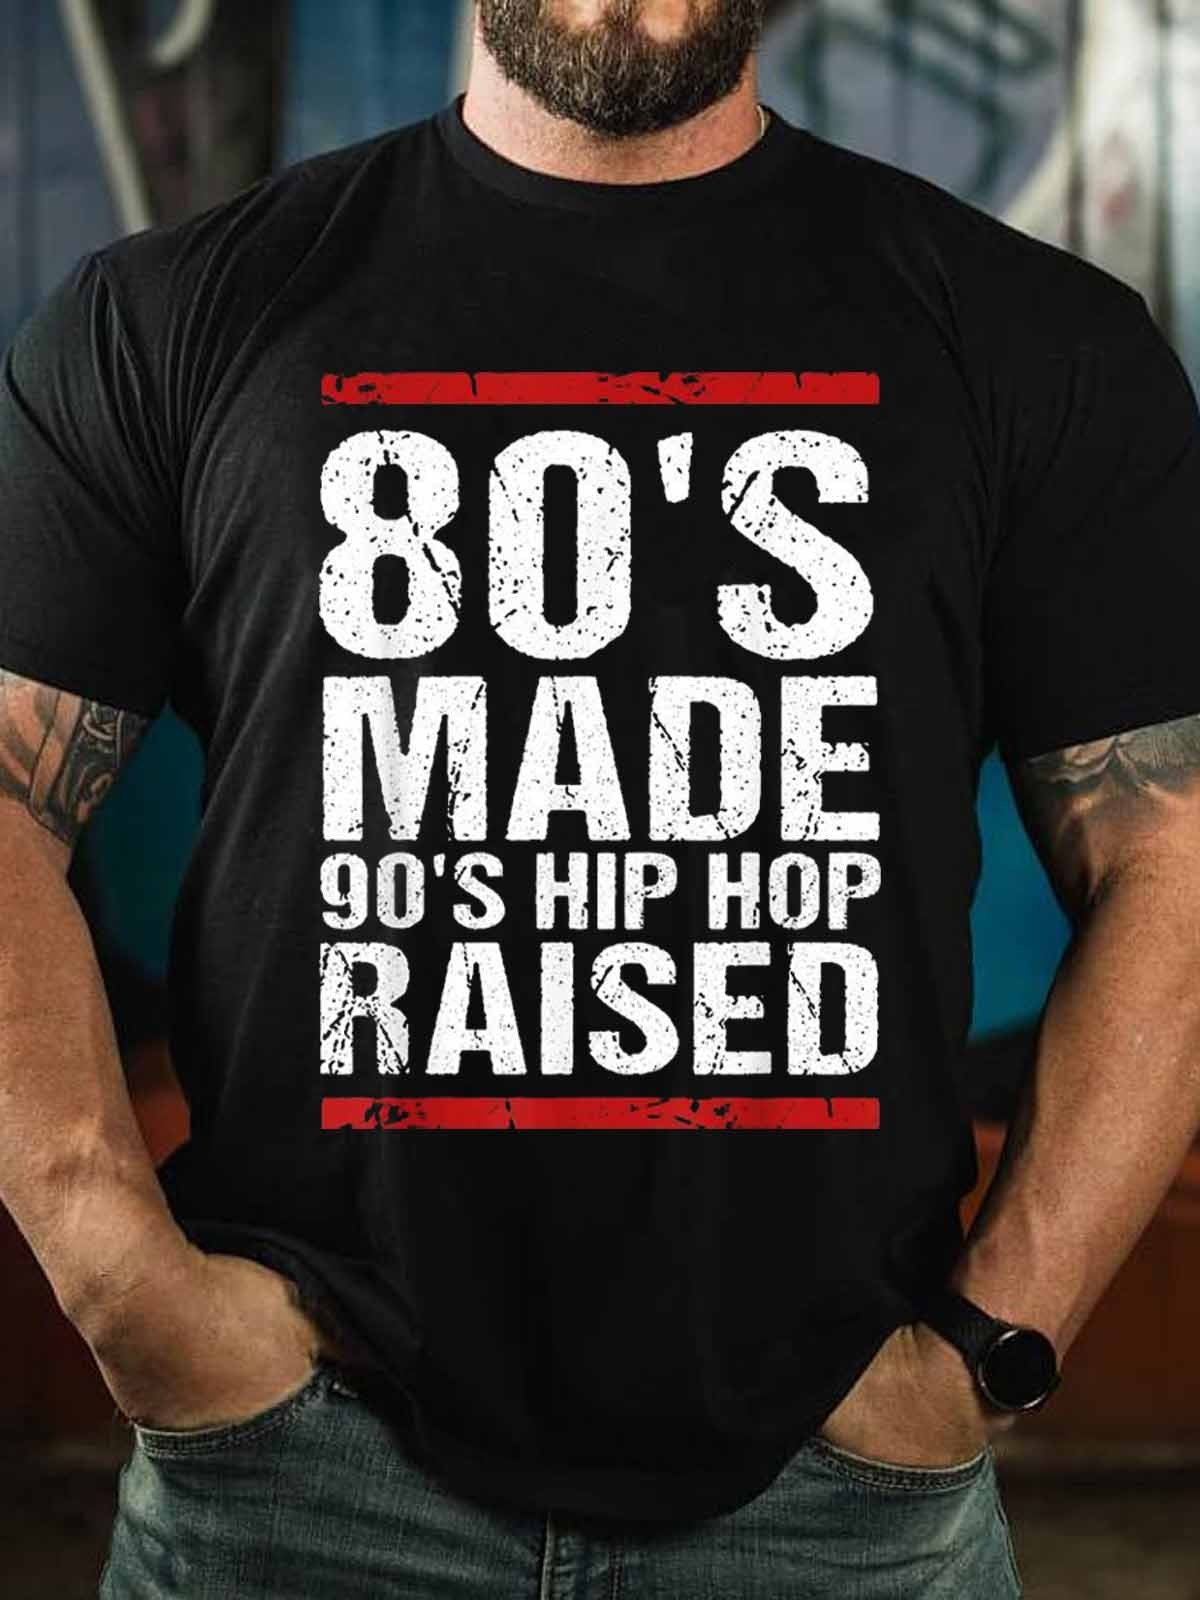 US$ 20.49 - Men's 80’s Made 90’s Hip Hop Raised T-Shirt Funny Saying ...